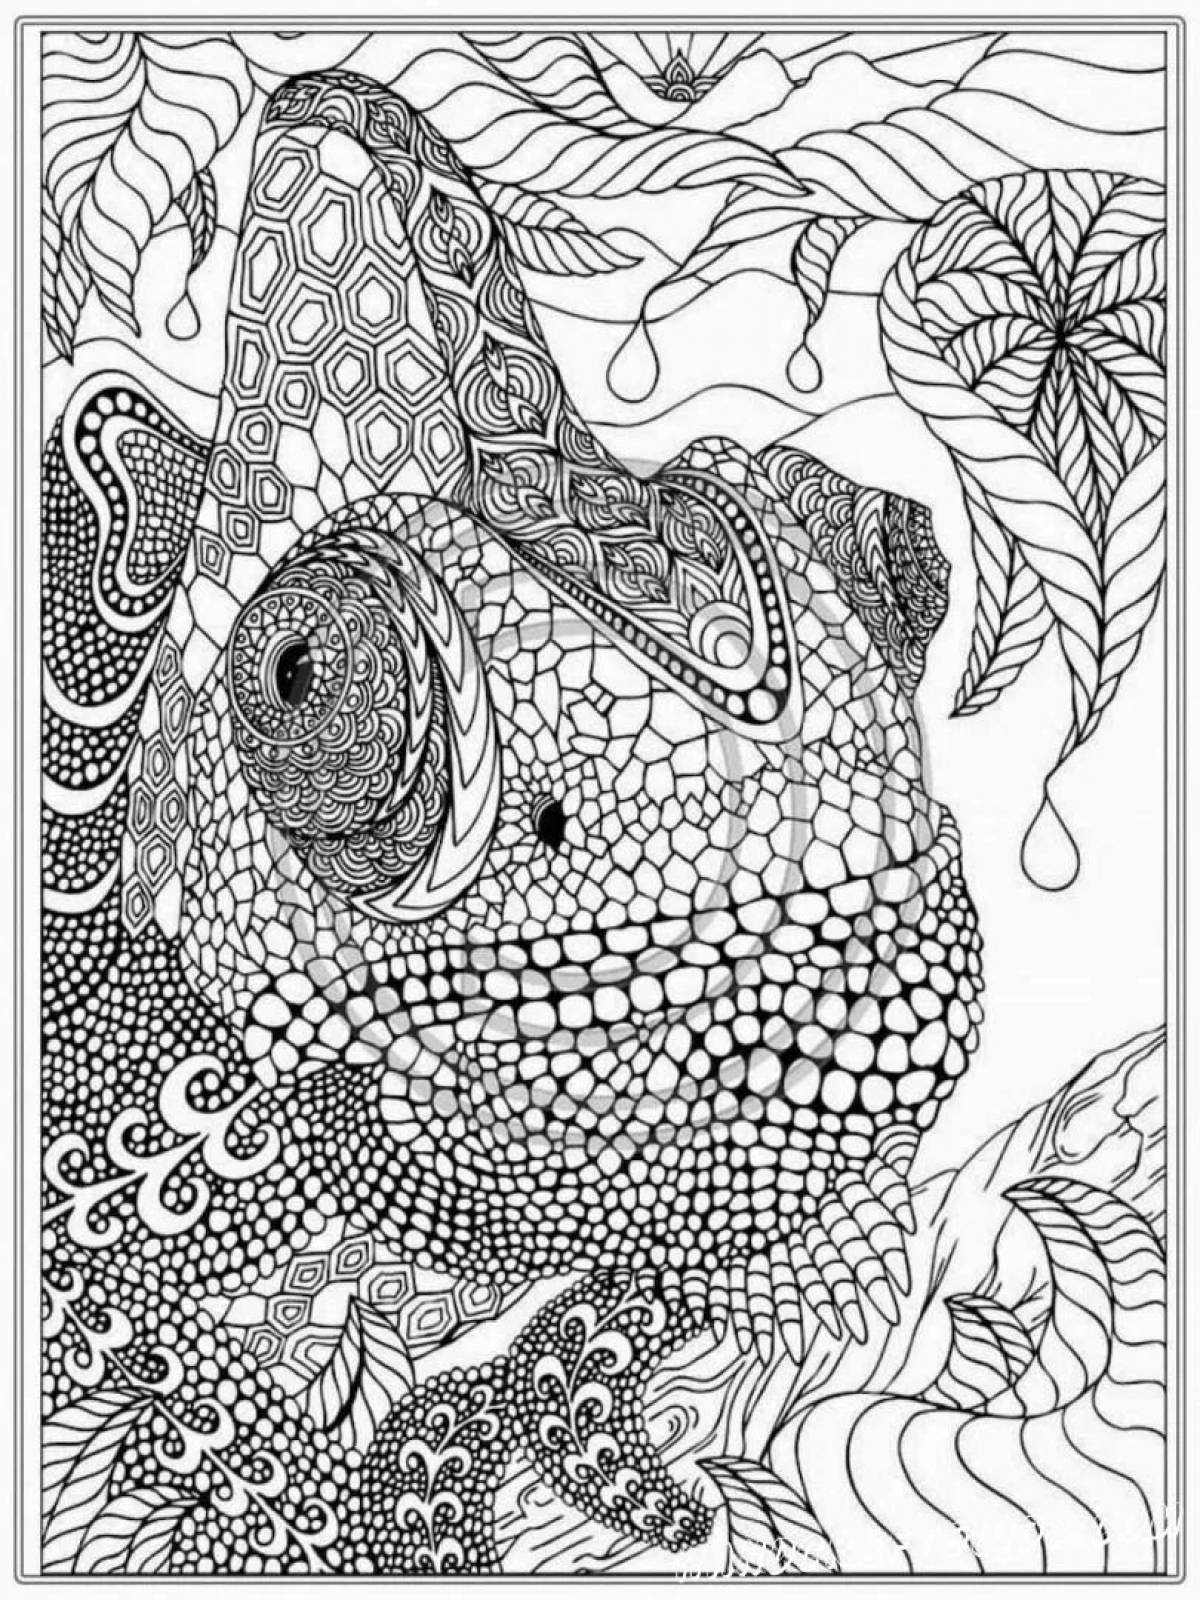 Exciting meditative coloring book for adults